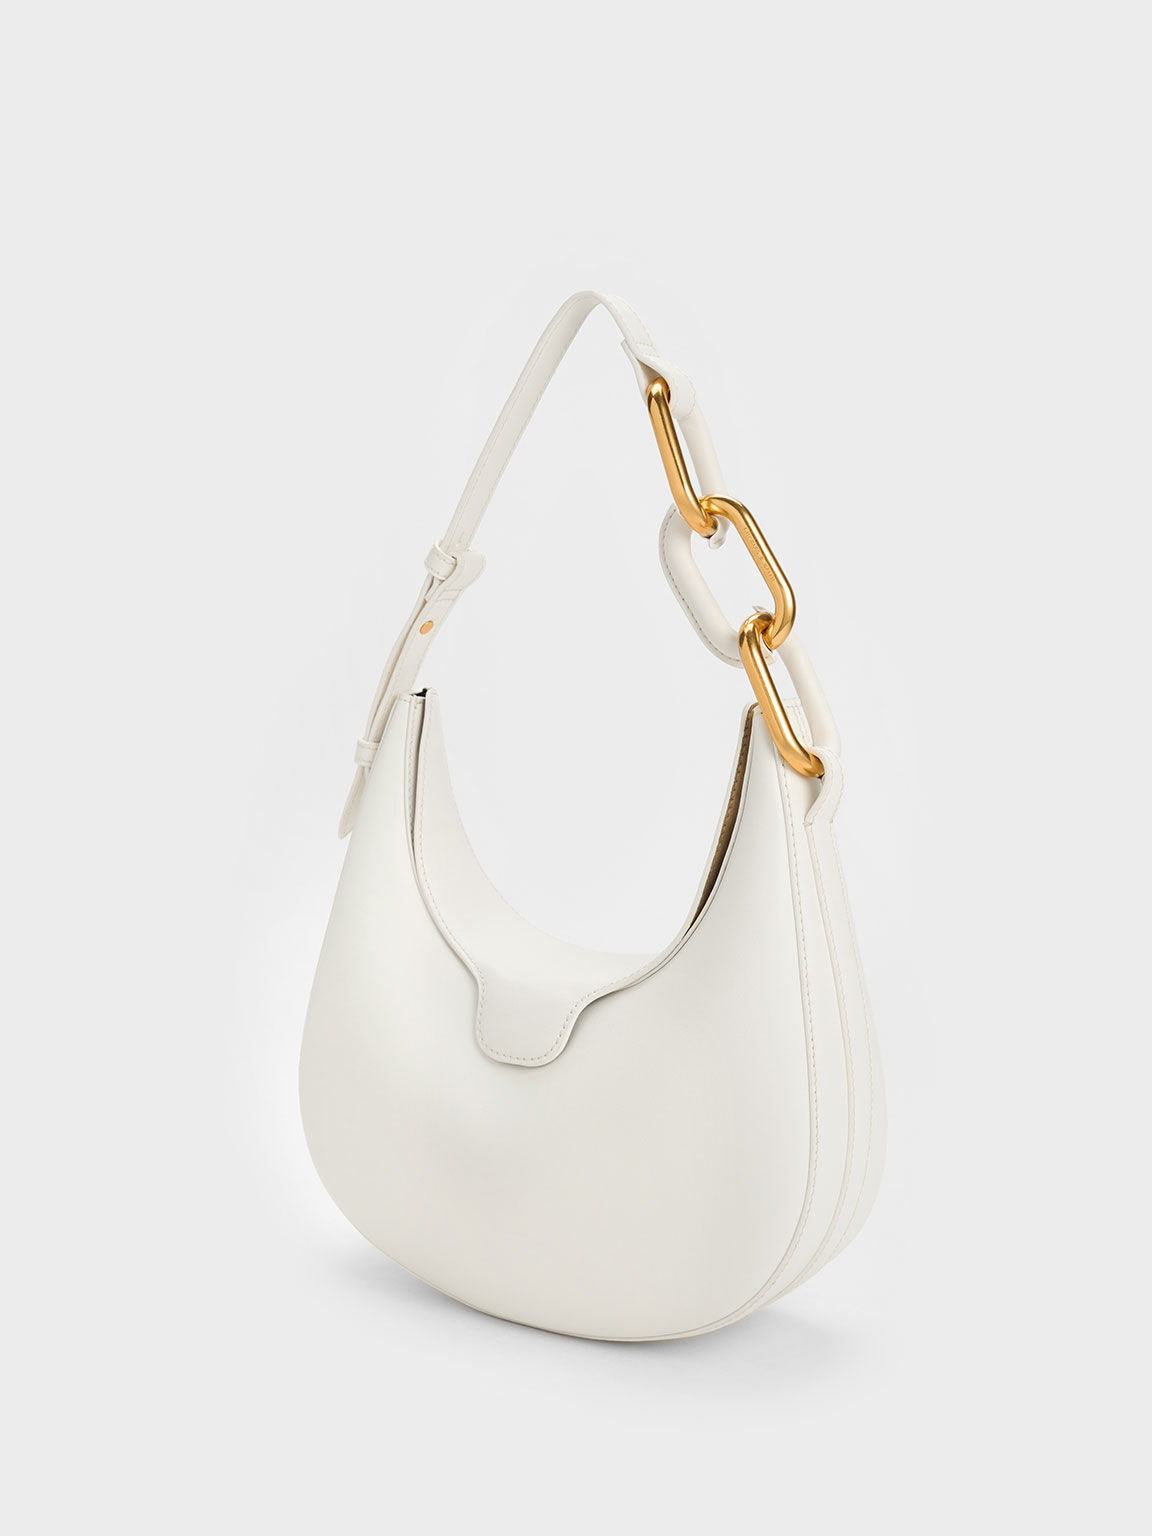 Pristine White Bags Are The Polished Arm Candy Of The Moment